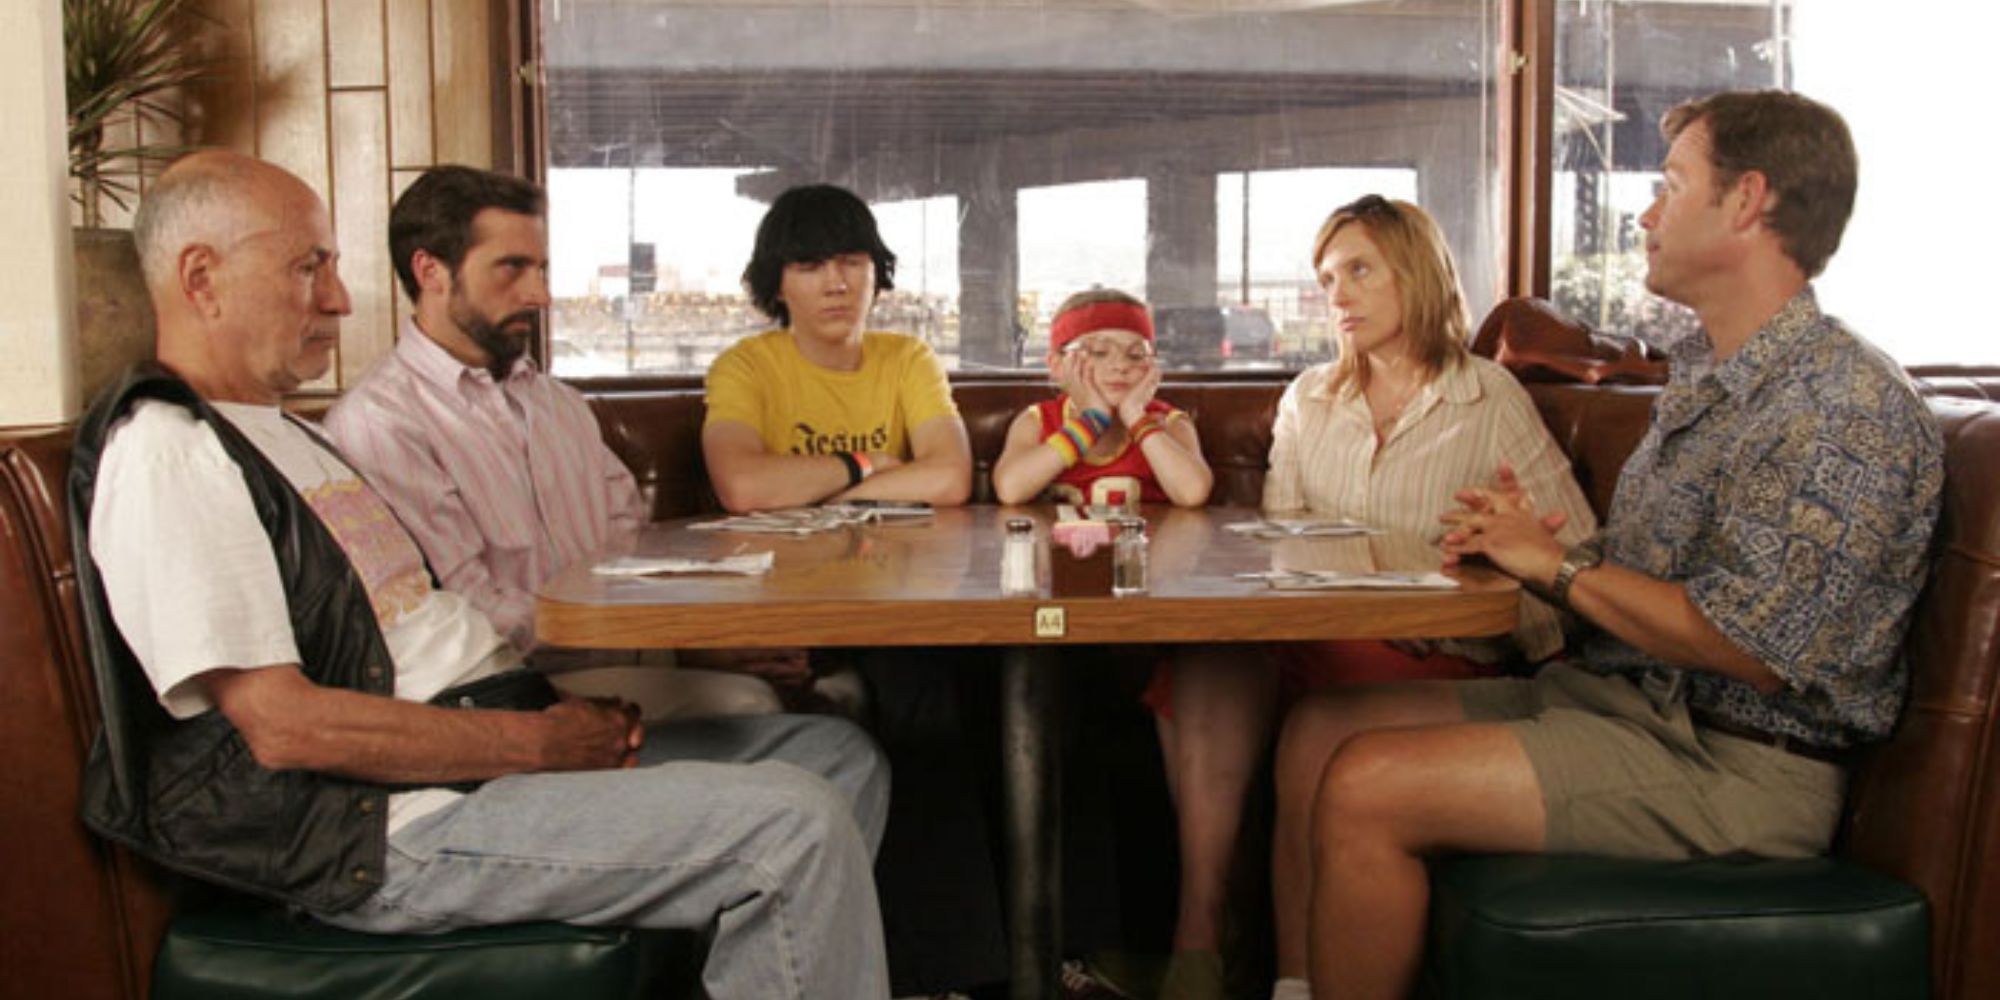 The Hoover family from Little Miss Sunshine sitting at a diner